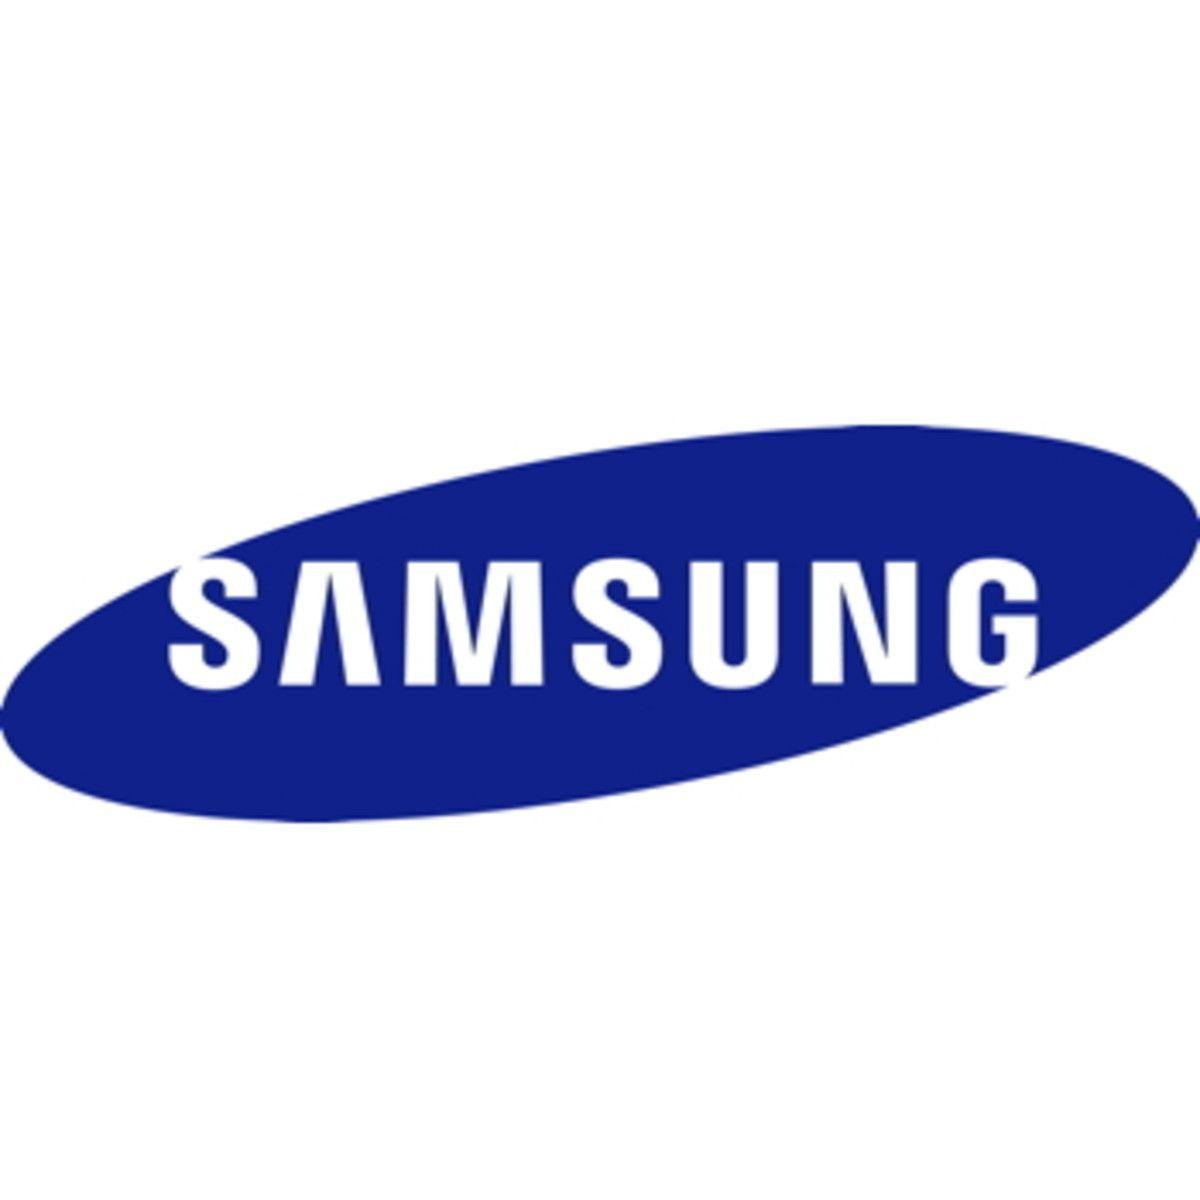 New Samsung Logo - Samsung set to launch new notebook line up in second half of 2013 ...